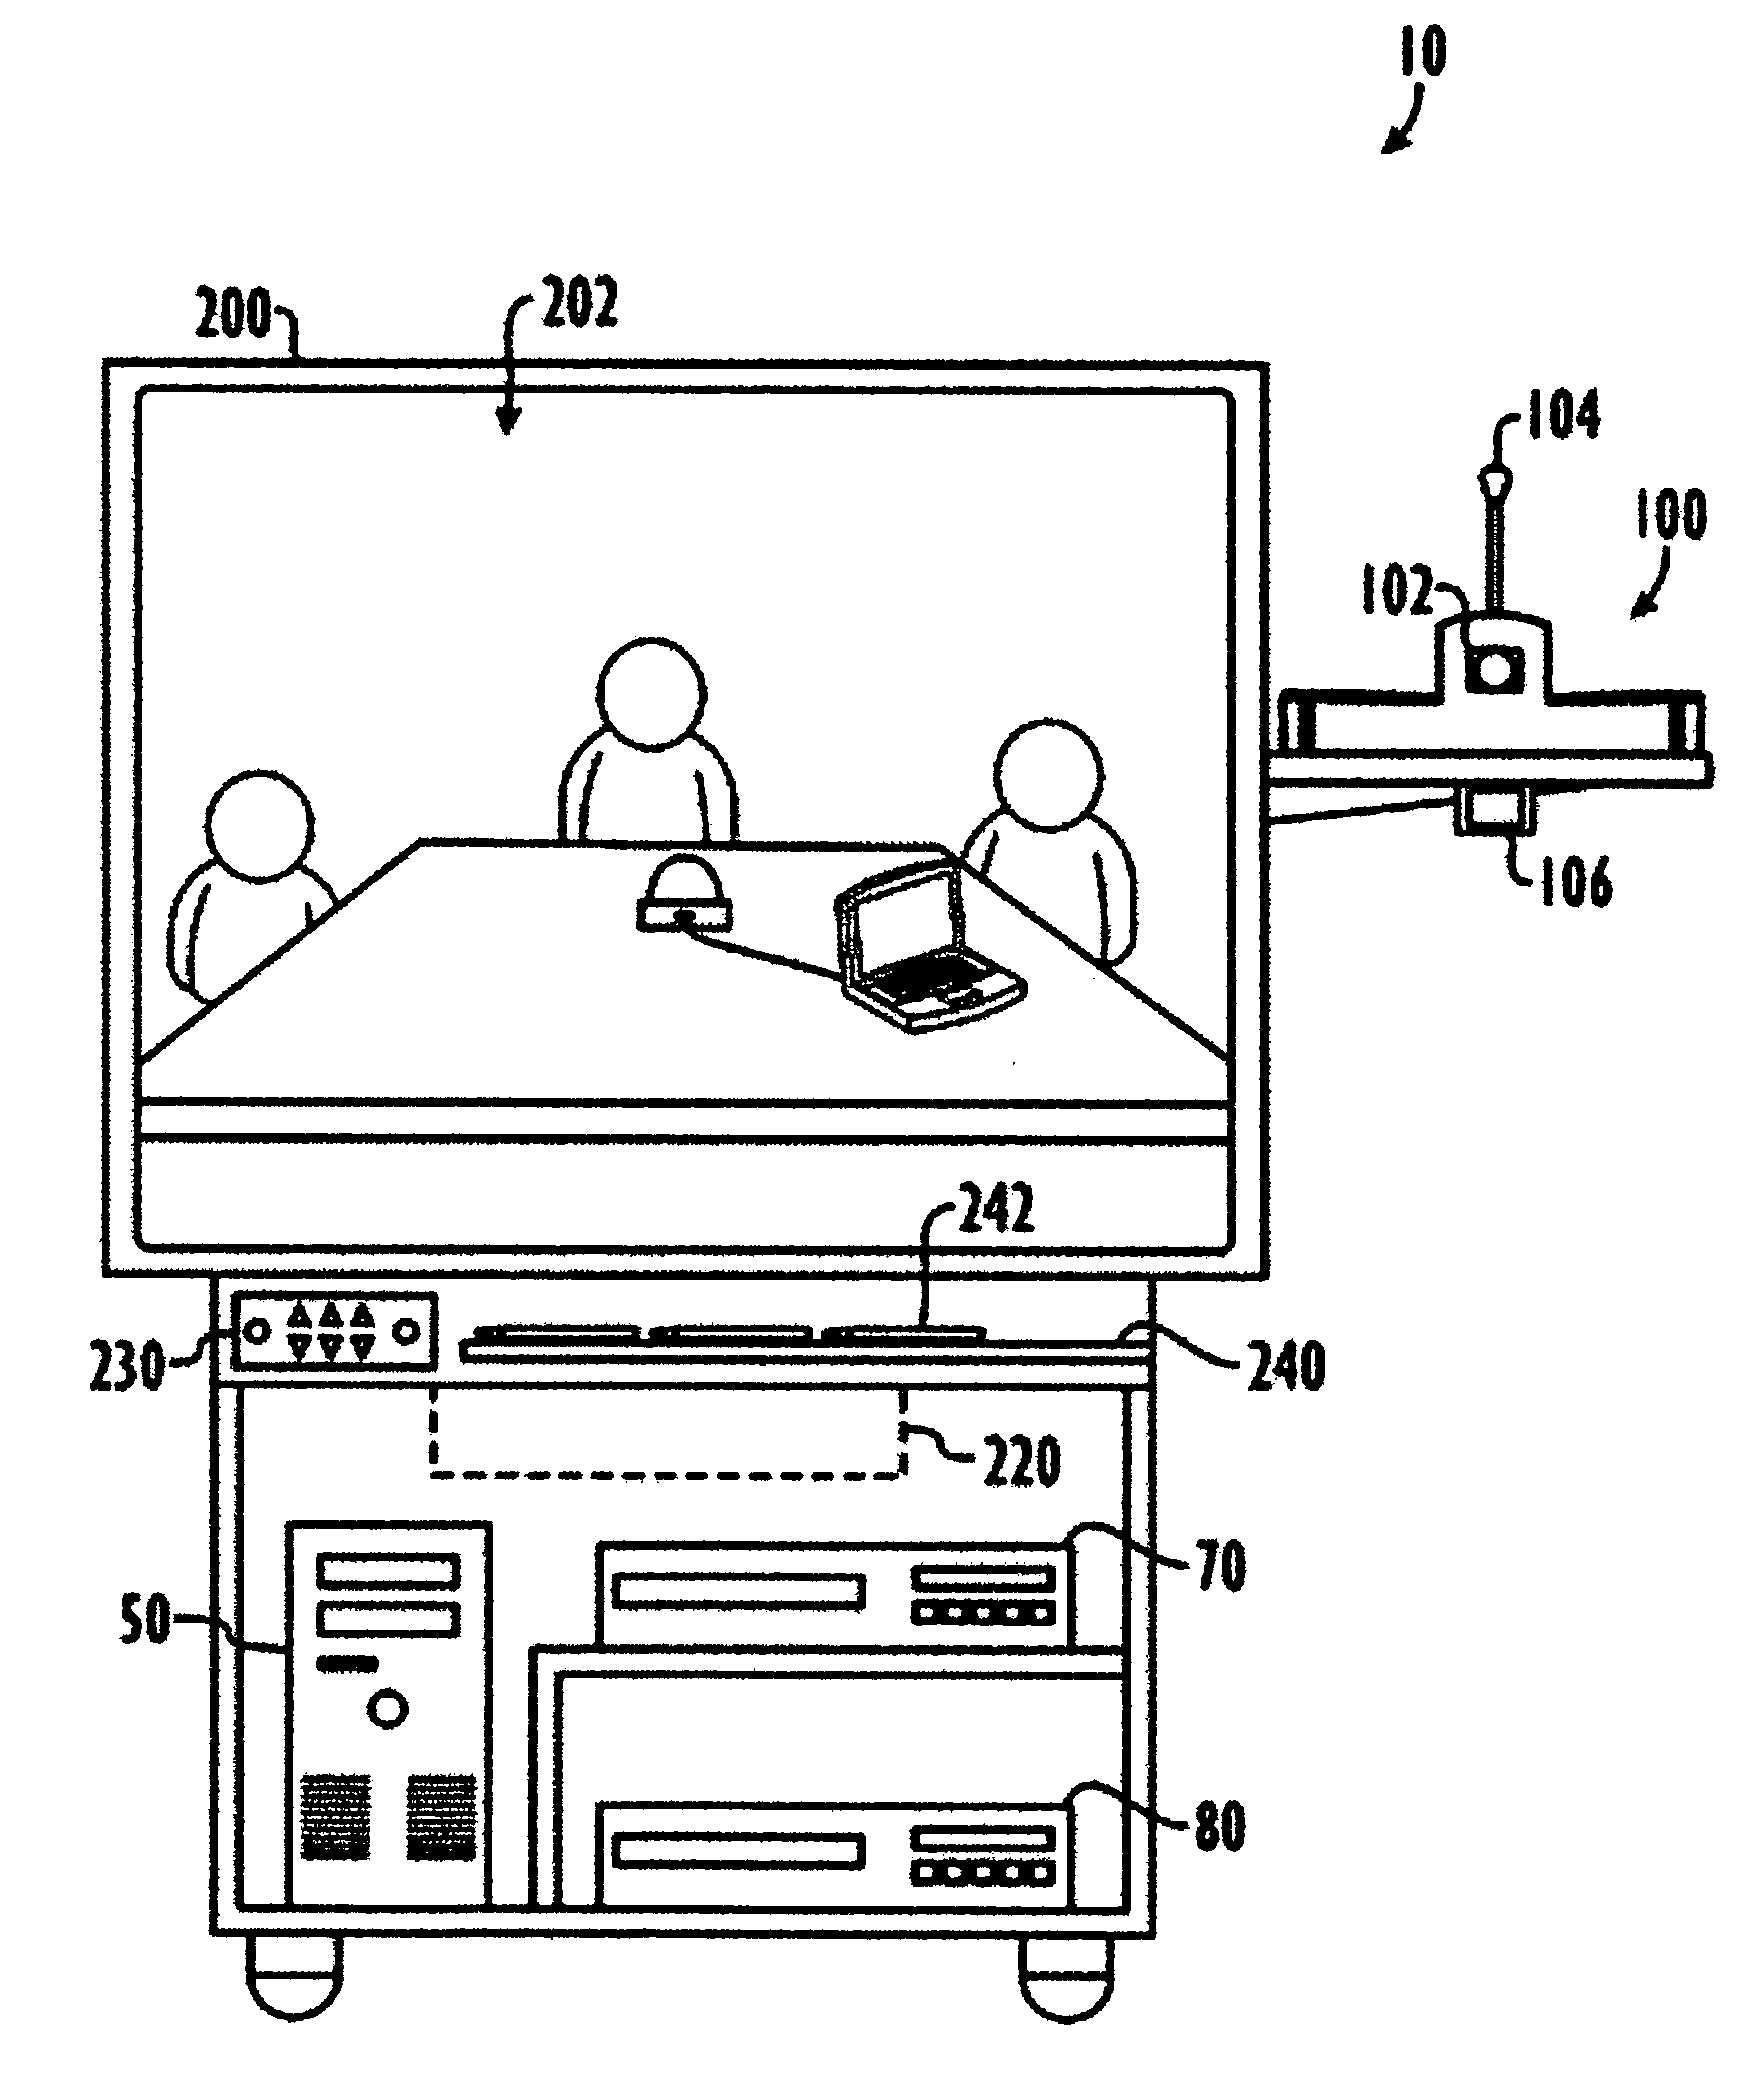 System and Method for Controlling Videoconference with Touch Screen Interface